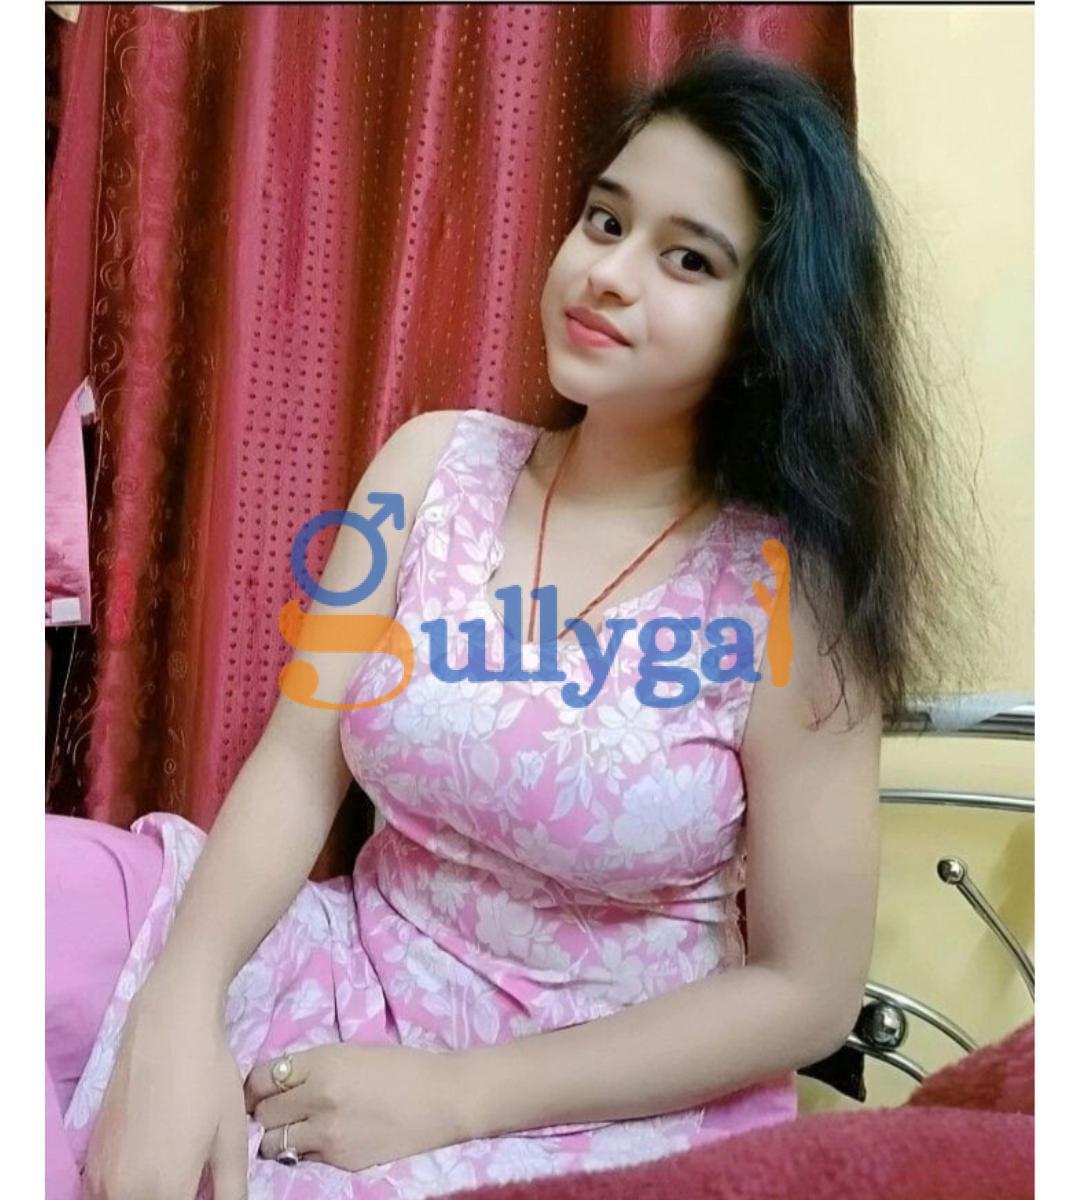 PUJA Call☎️ 6201858840 ☎️❤️Low price call girl❤️100% TRUSTED independent call girl ❤️SAFE& SECURE HIGH CLASS SARVICE❣️ AFFORDABLE